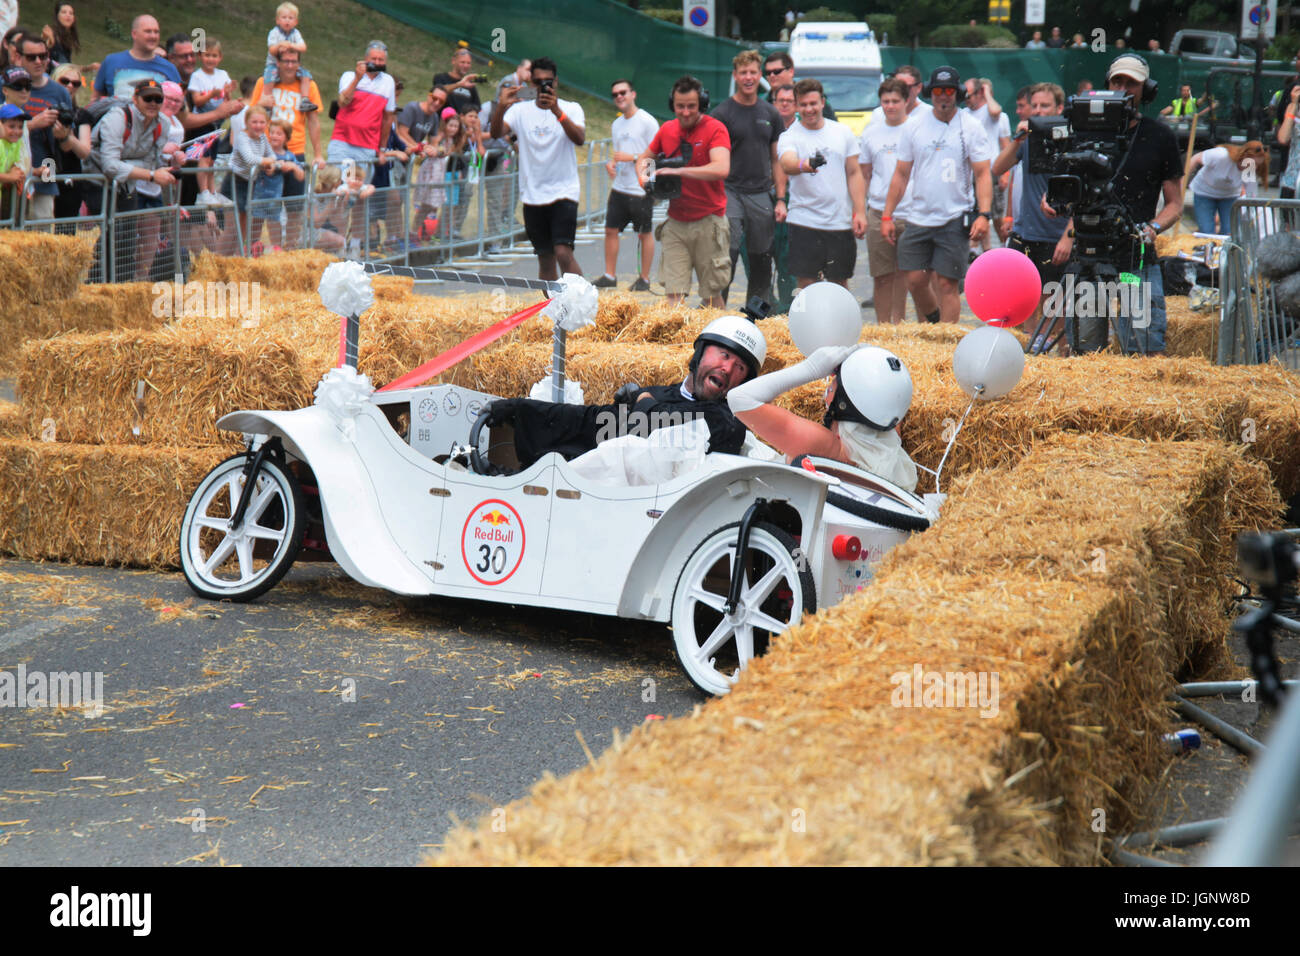 London UK. 09th July 2017 Alexandra Palace welcomed the Wacky Races, or soap box vehicles, aka gravity racer or soapbox Red Bull Soapbox Race is an international event in which amateur drivers race homemade soapbox vehicles. Each hand-made machine is fuelled by nothing but sheer courage This unique, non-motorised racing event challenges both experienced racers and amateurs alike to design and build outrageous soapbox dream machines and compete against the clock in a downhill race. Credit: Paul Quezada-Neiman/Alamy Live News Stock Photo